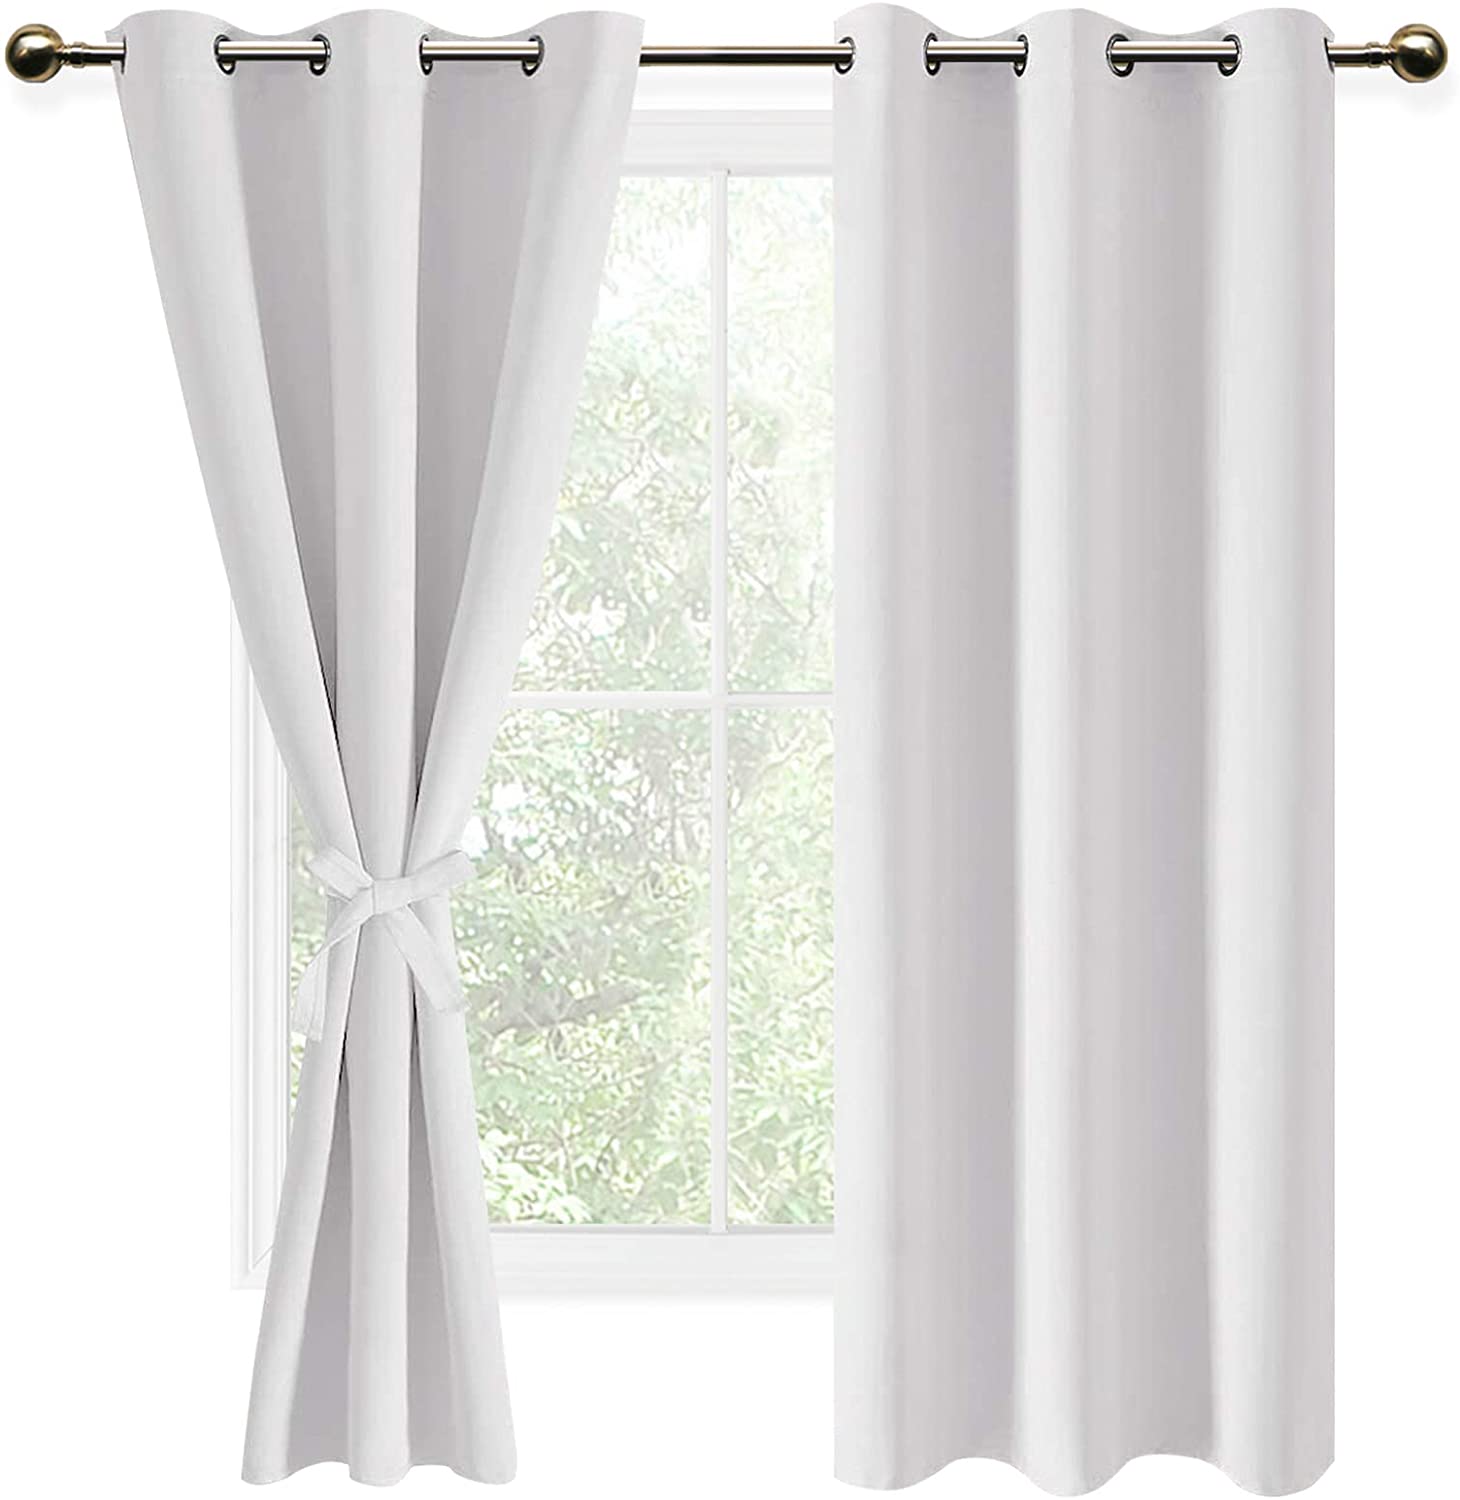 IBAOLEA Blackout Curtains for Bedroom with Tiebacks Room Darkening  Privacy Grommet Top Window Curtains for Living Room, 42 x 72 inch Long,  Greyish White, Set of Panels Greyish White W42"xL72"